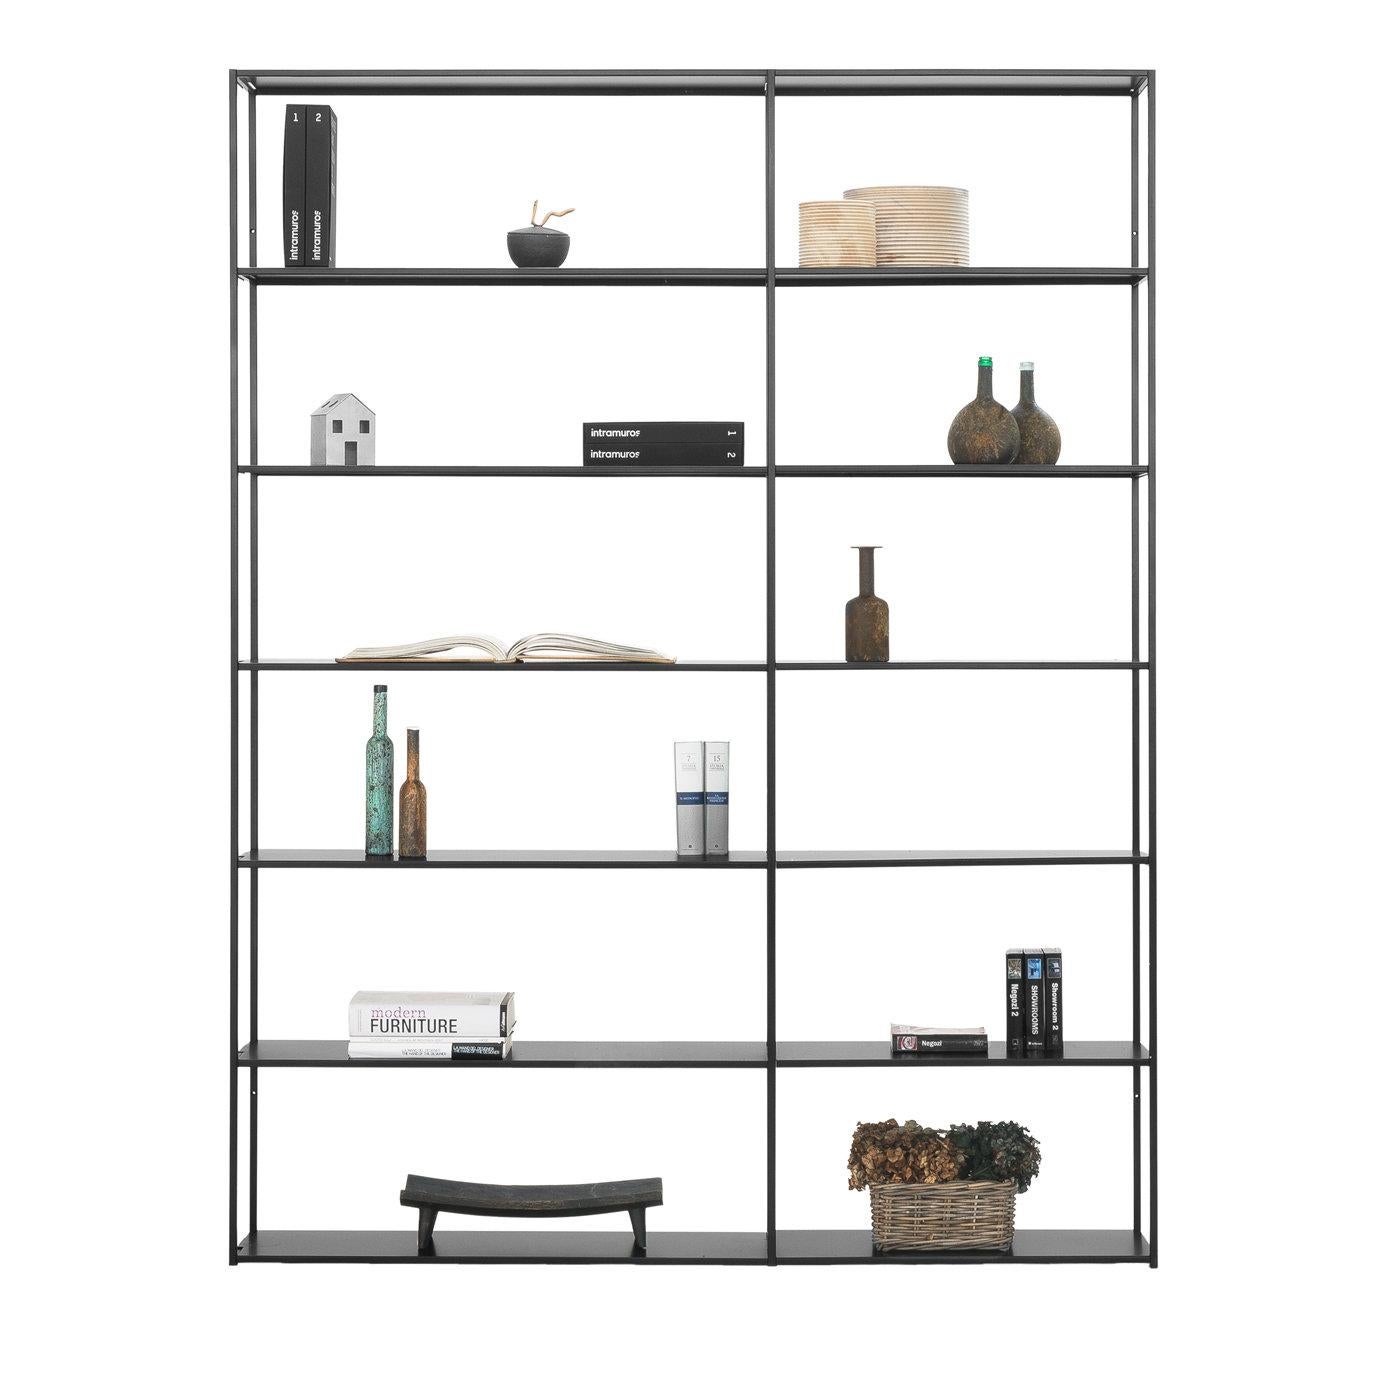 Modular bookcase that can be disassembled. Uprights in square tubing with metal snap-fit shelves. Shelf length is either 74 or 104 cm. Powder coated in black or white. Clearance between shelves is 36 cm. Securing to the wall is recommended.